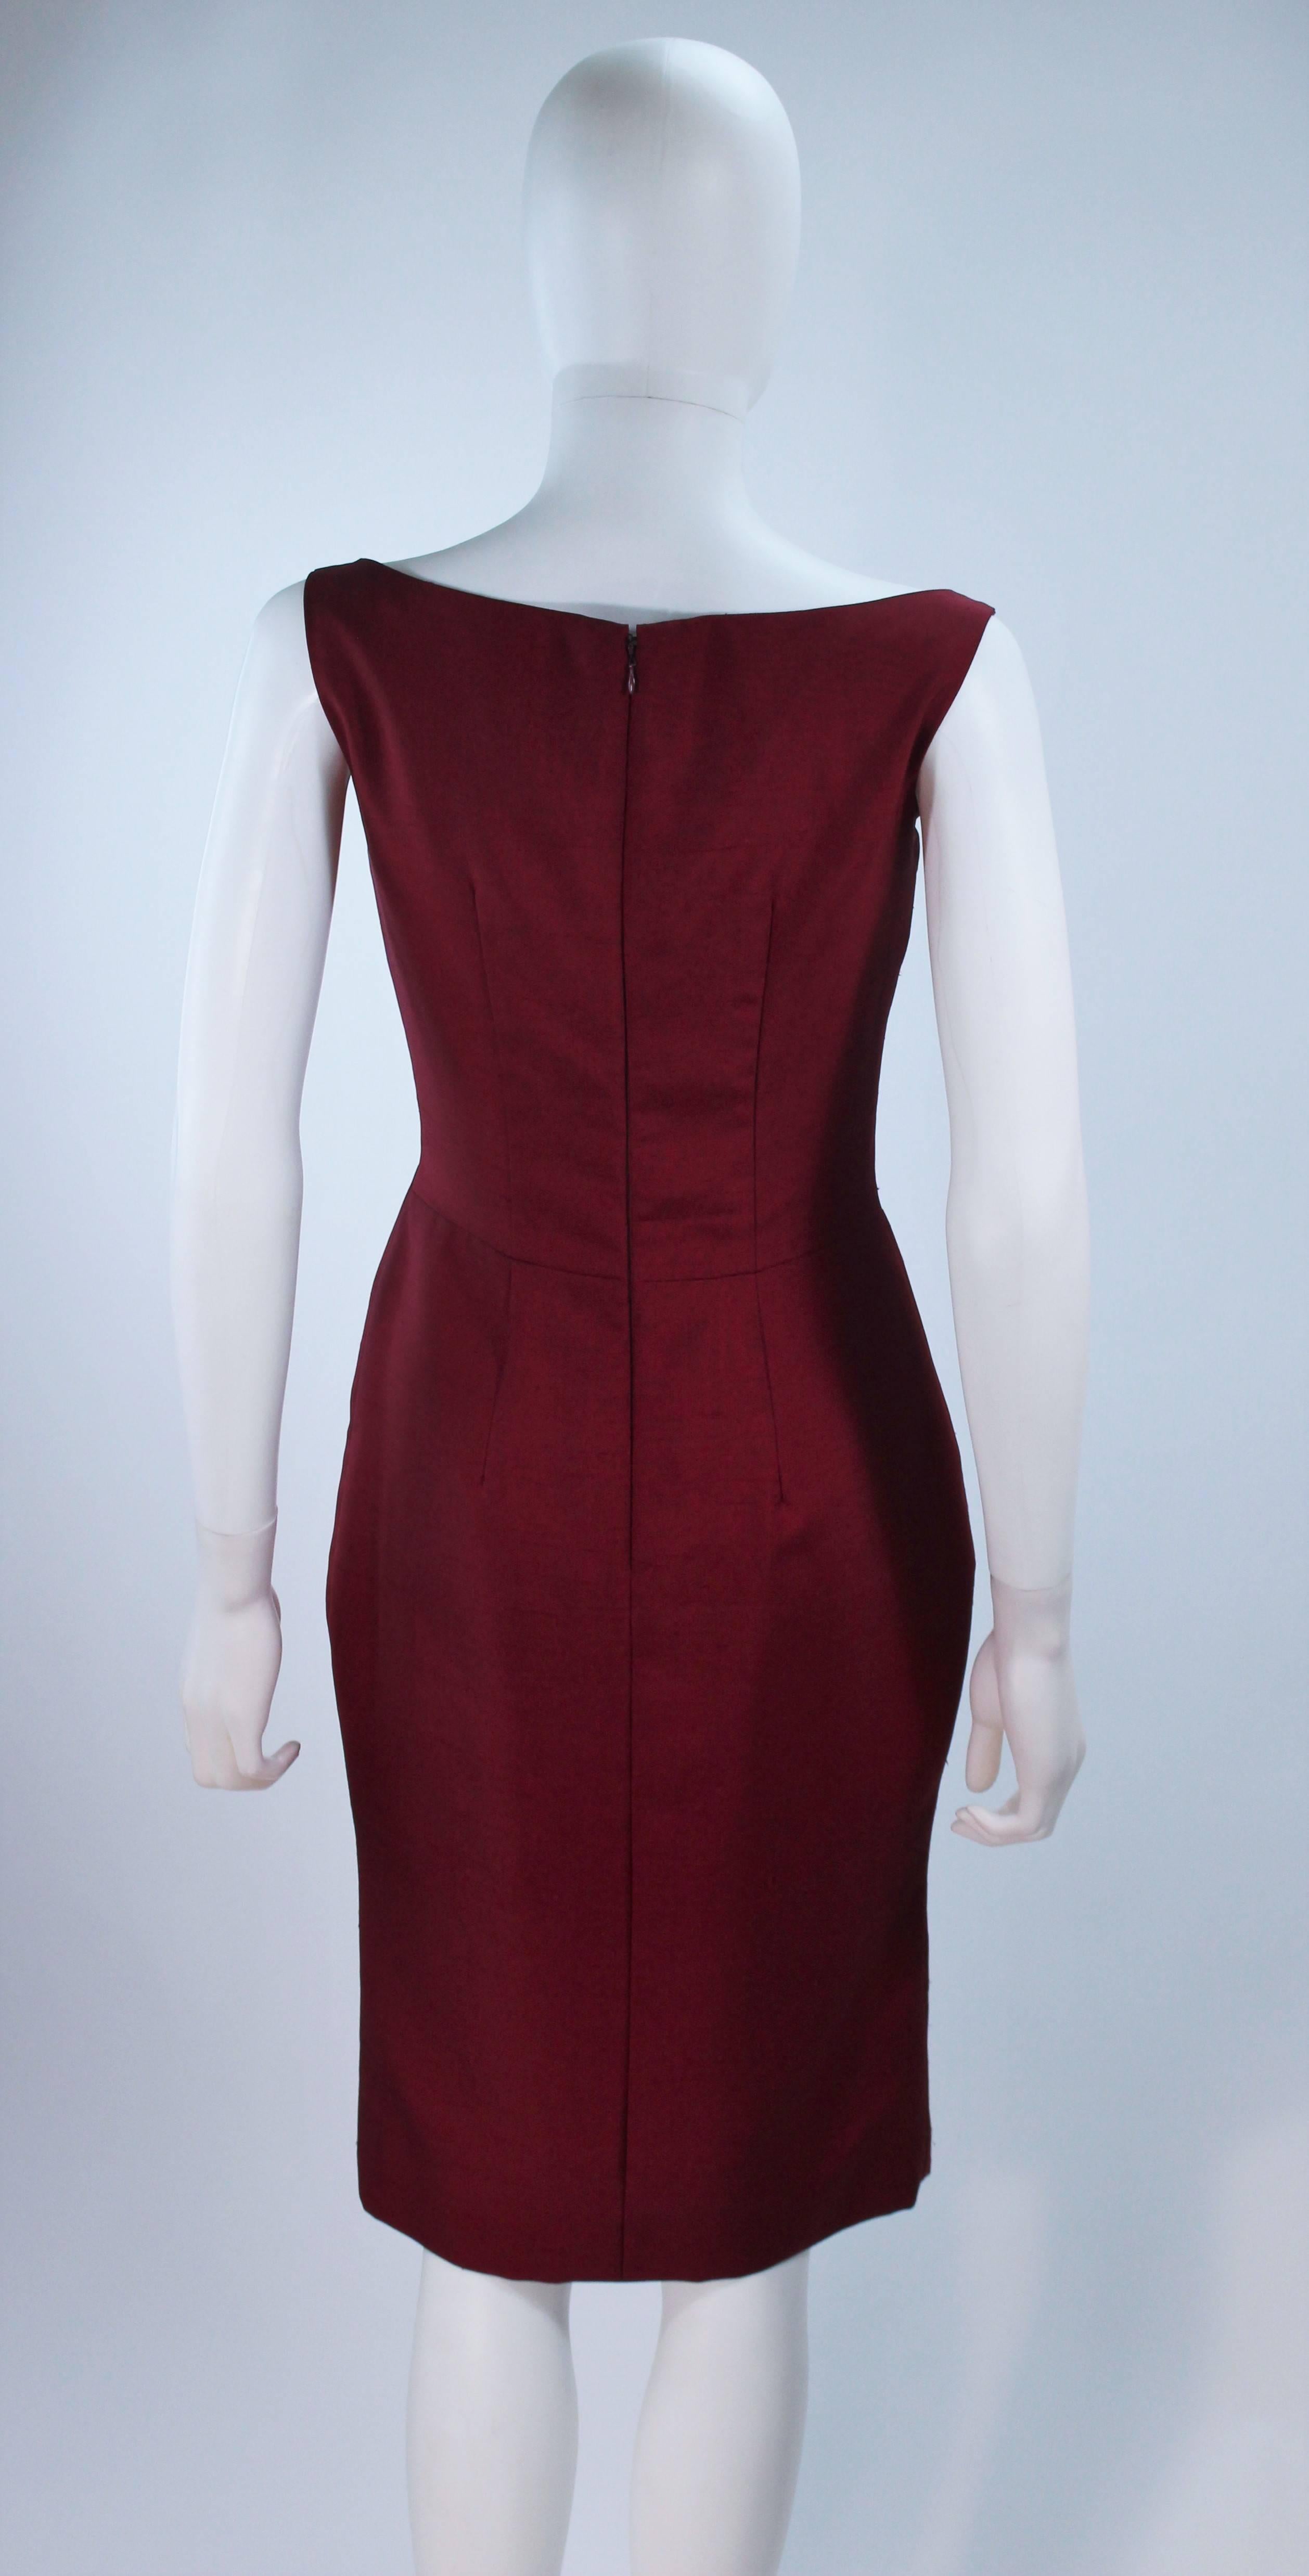 ELIZABETH MASON COUTURE Burgundy Silk Cocktail Dress with Bow Made to Order For Sale 2